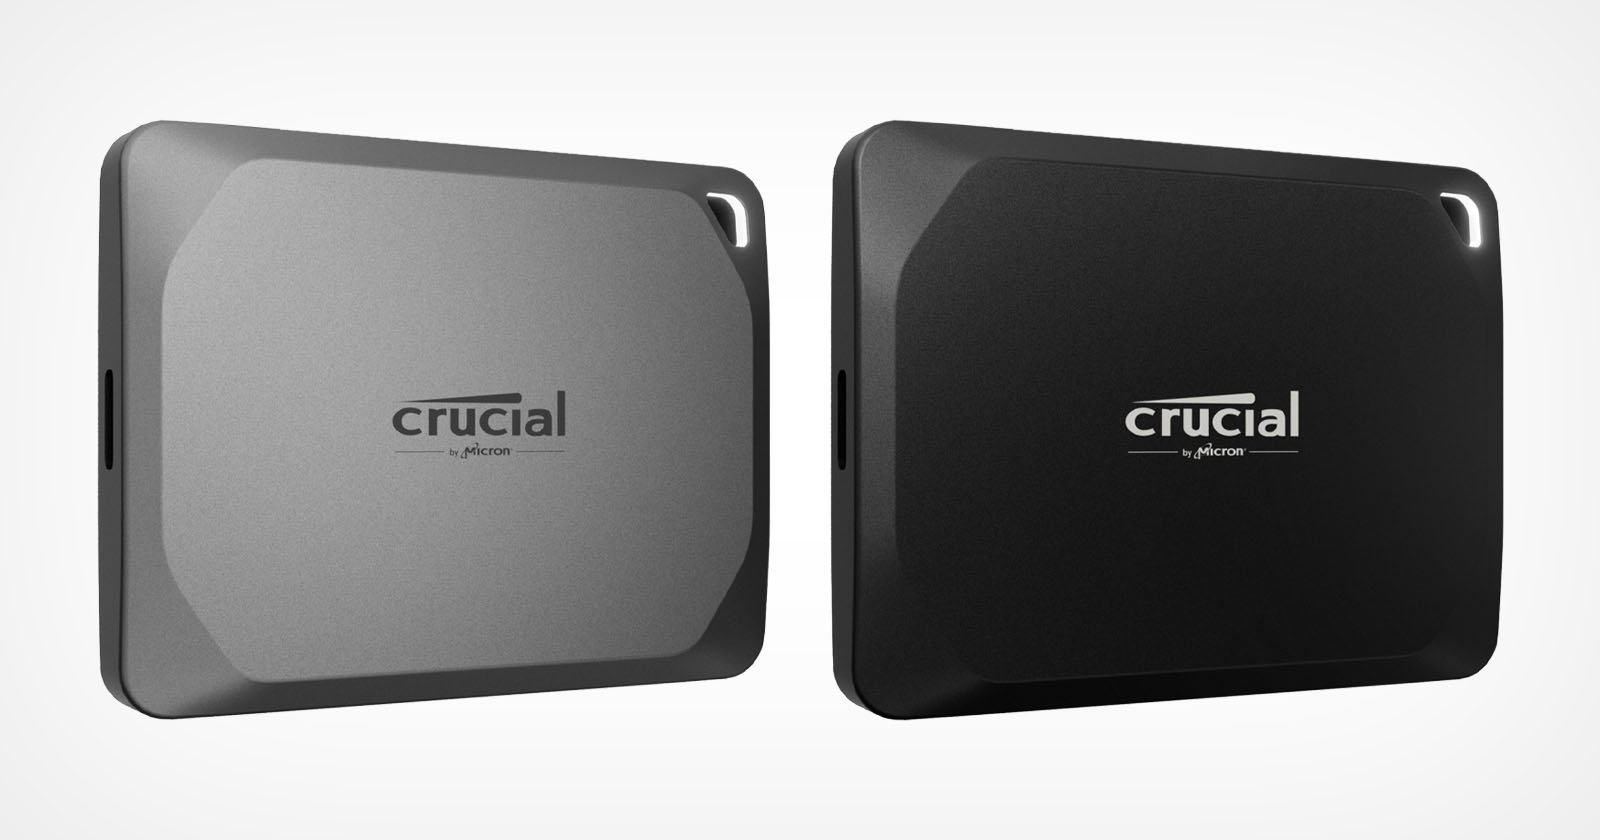 Crucial's New Small, Compact, Super-Fast SSDs are Made for Photographers